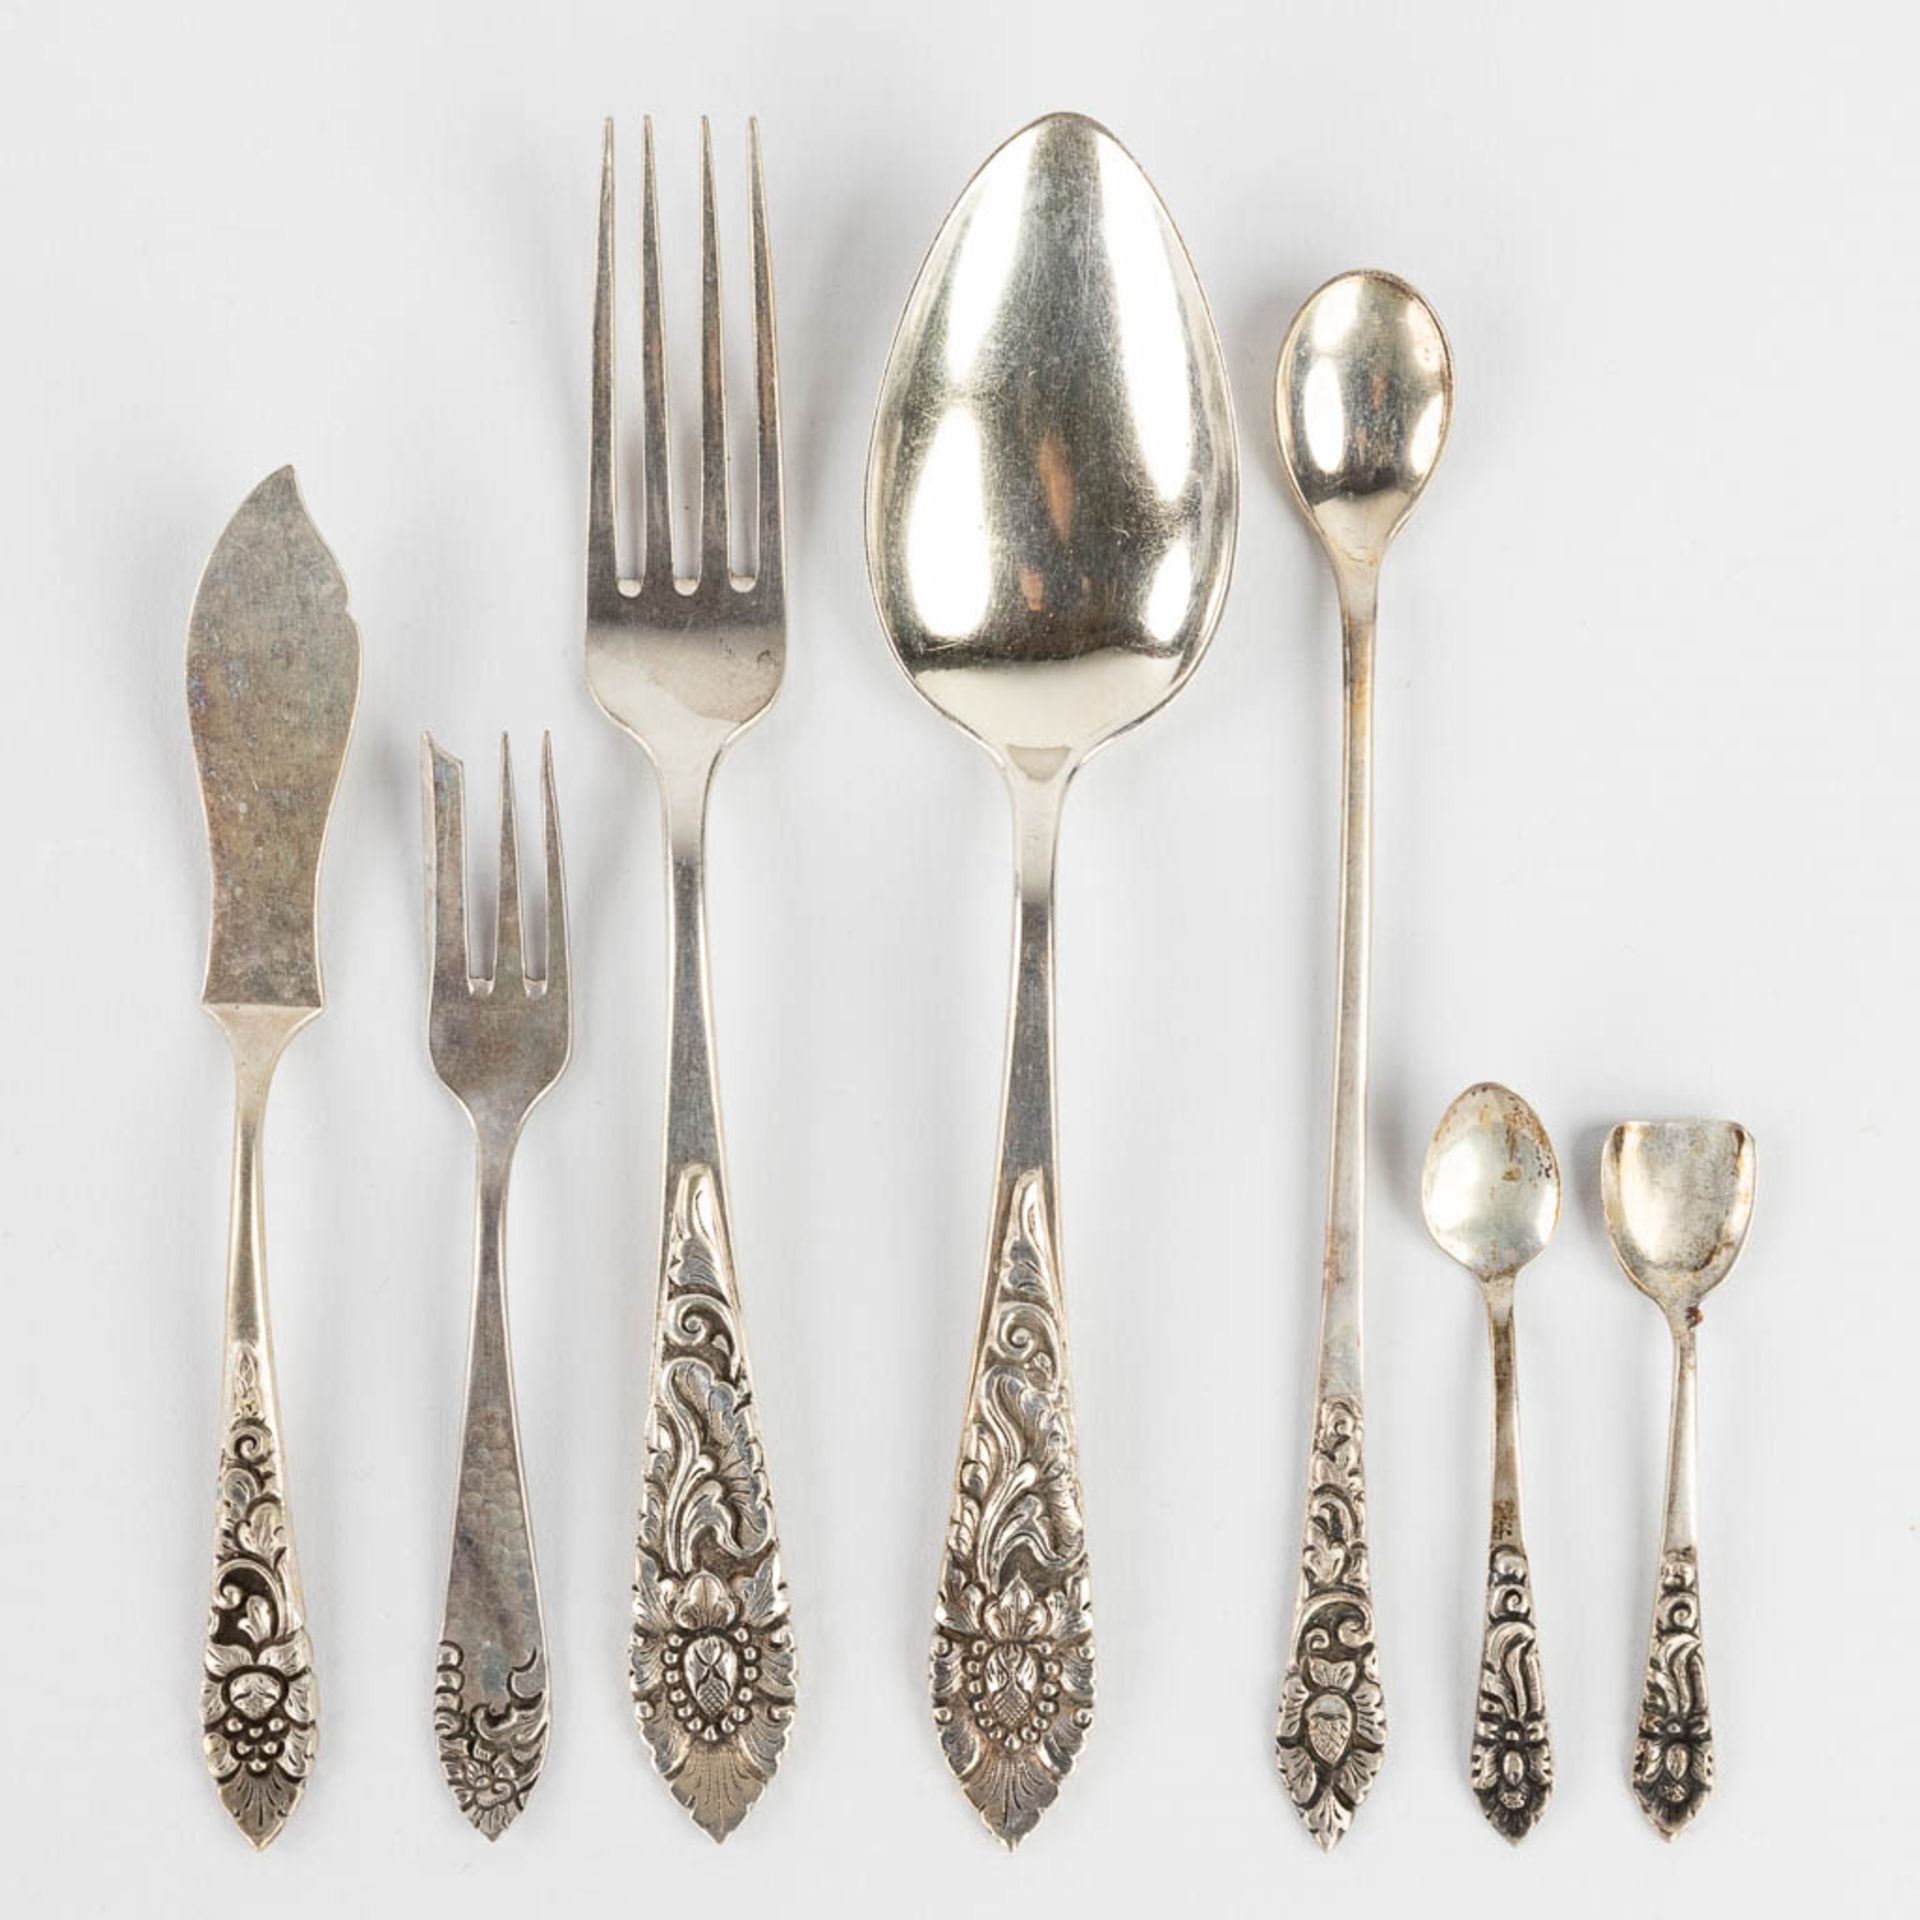 61 pieces of silver cutlery and accessories. (L:29 cm) - Image 12 of 22